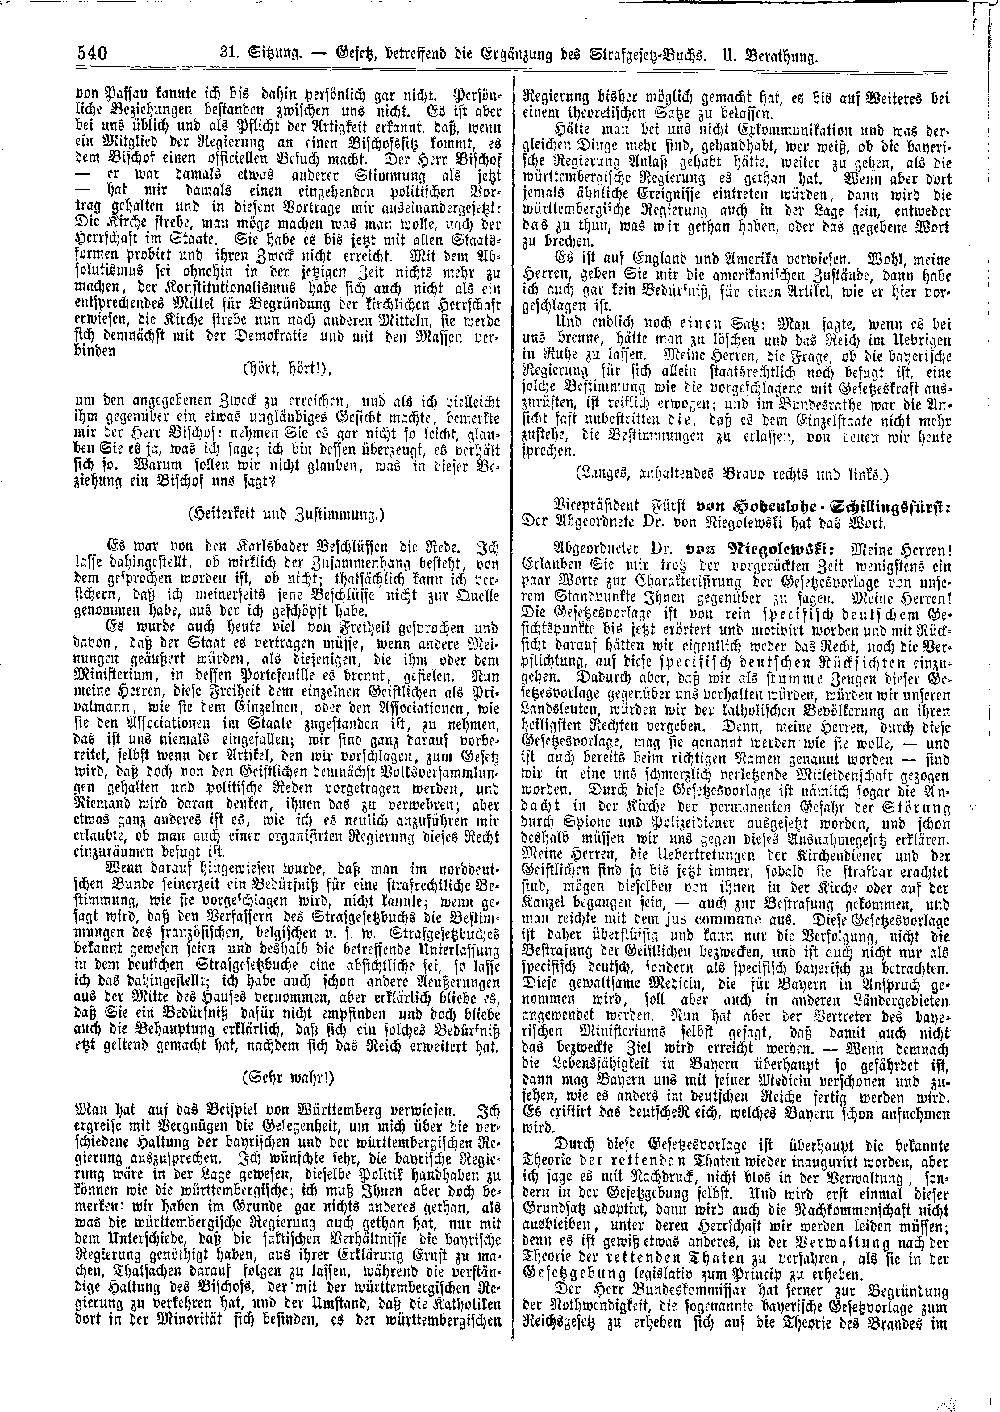 Scan of page 540